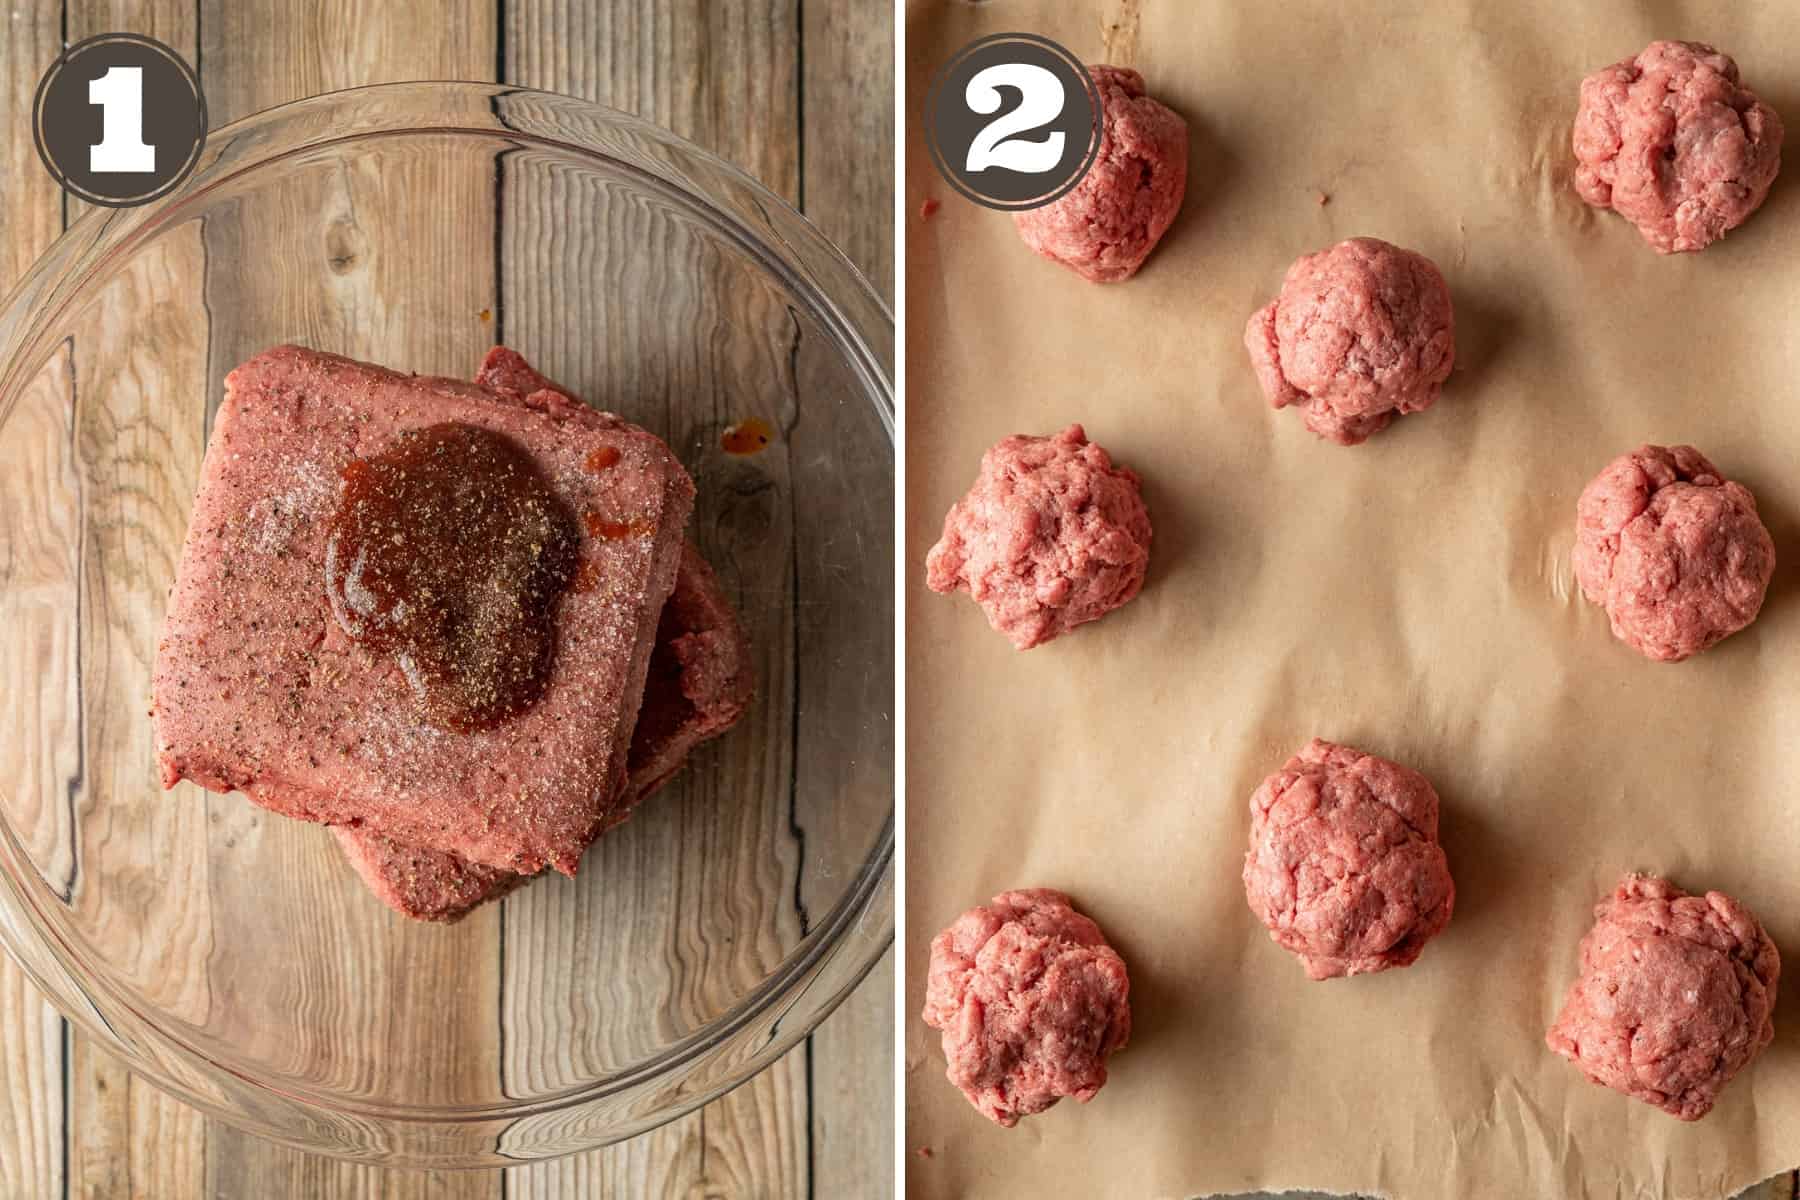 Side by side process photos showing ground meat in a bowl with seasoning and eight balls of meat on parchment paper.